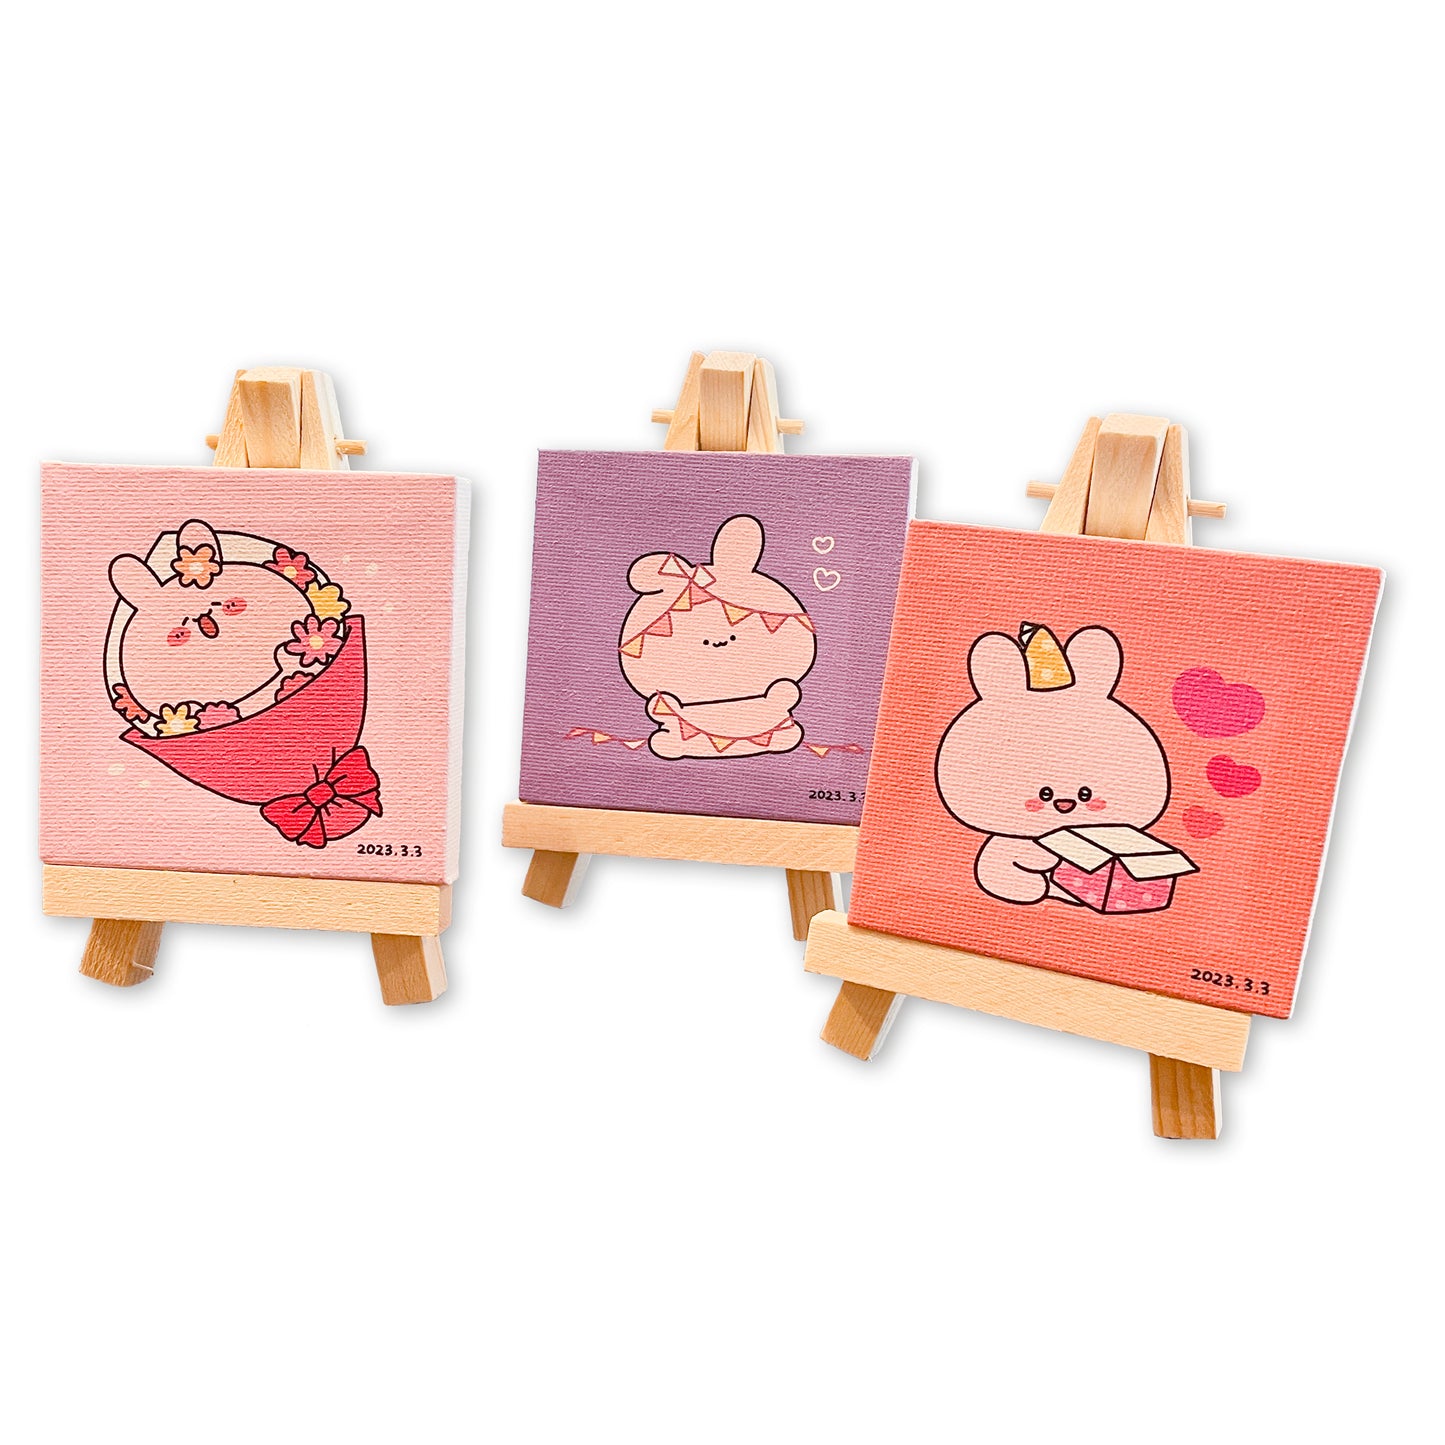 [Asamimi-chan] Mini canvas complete set with random easel (6 types in total) [shipped in early April]